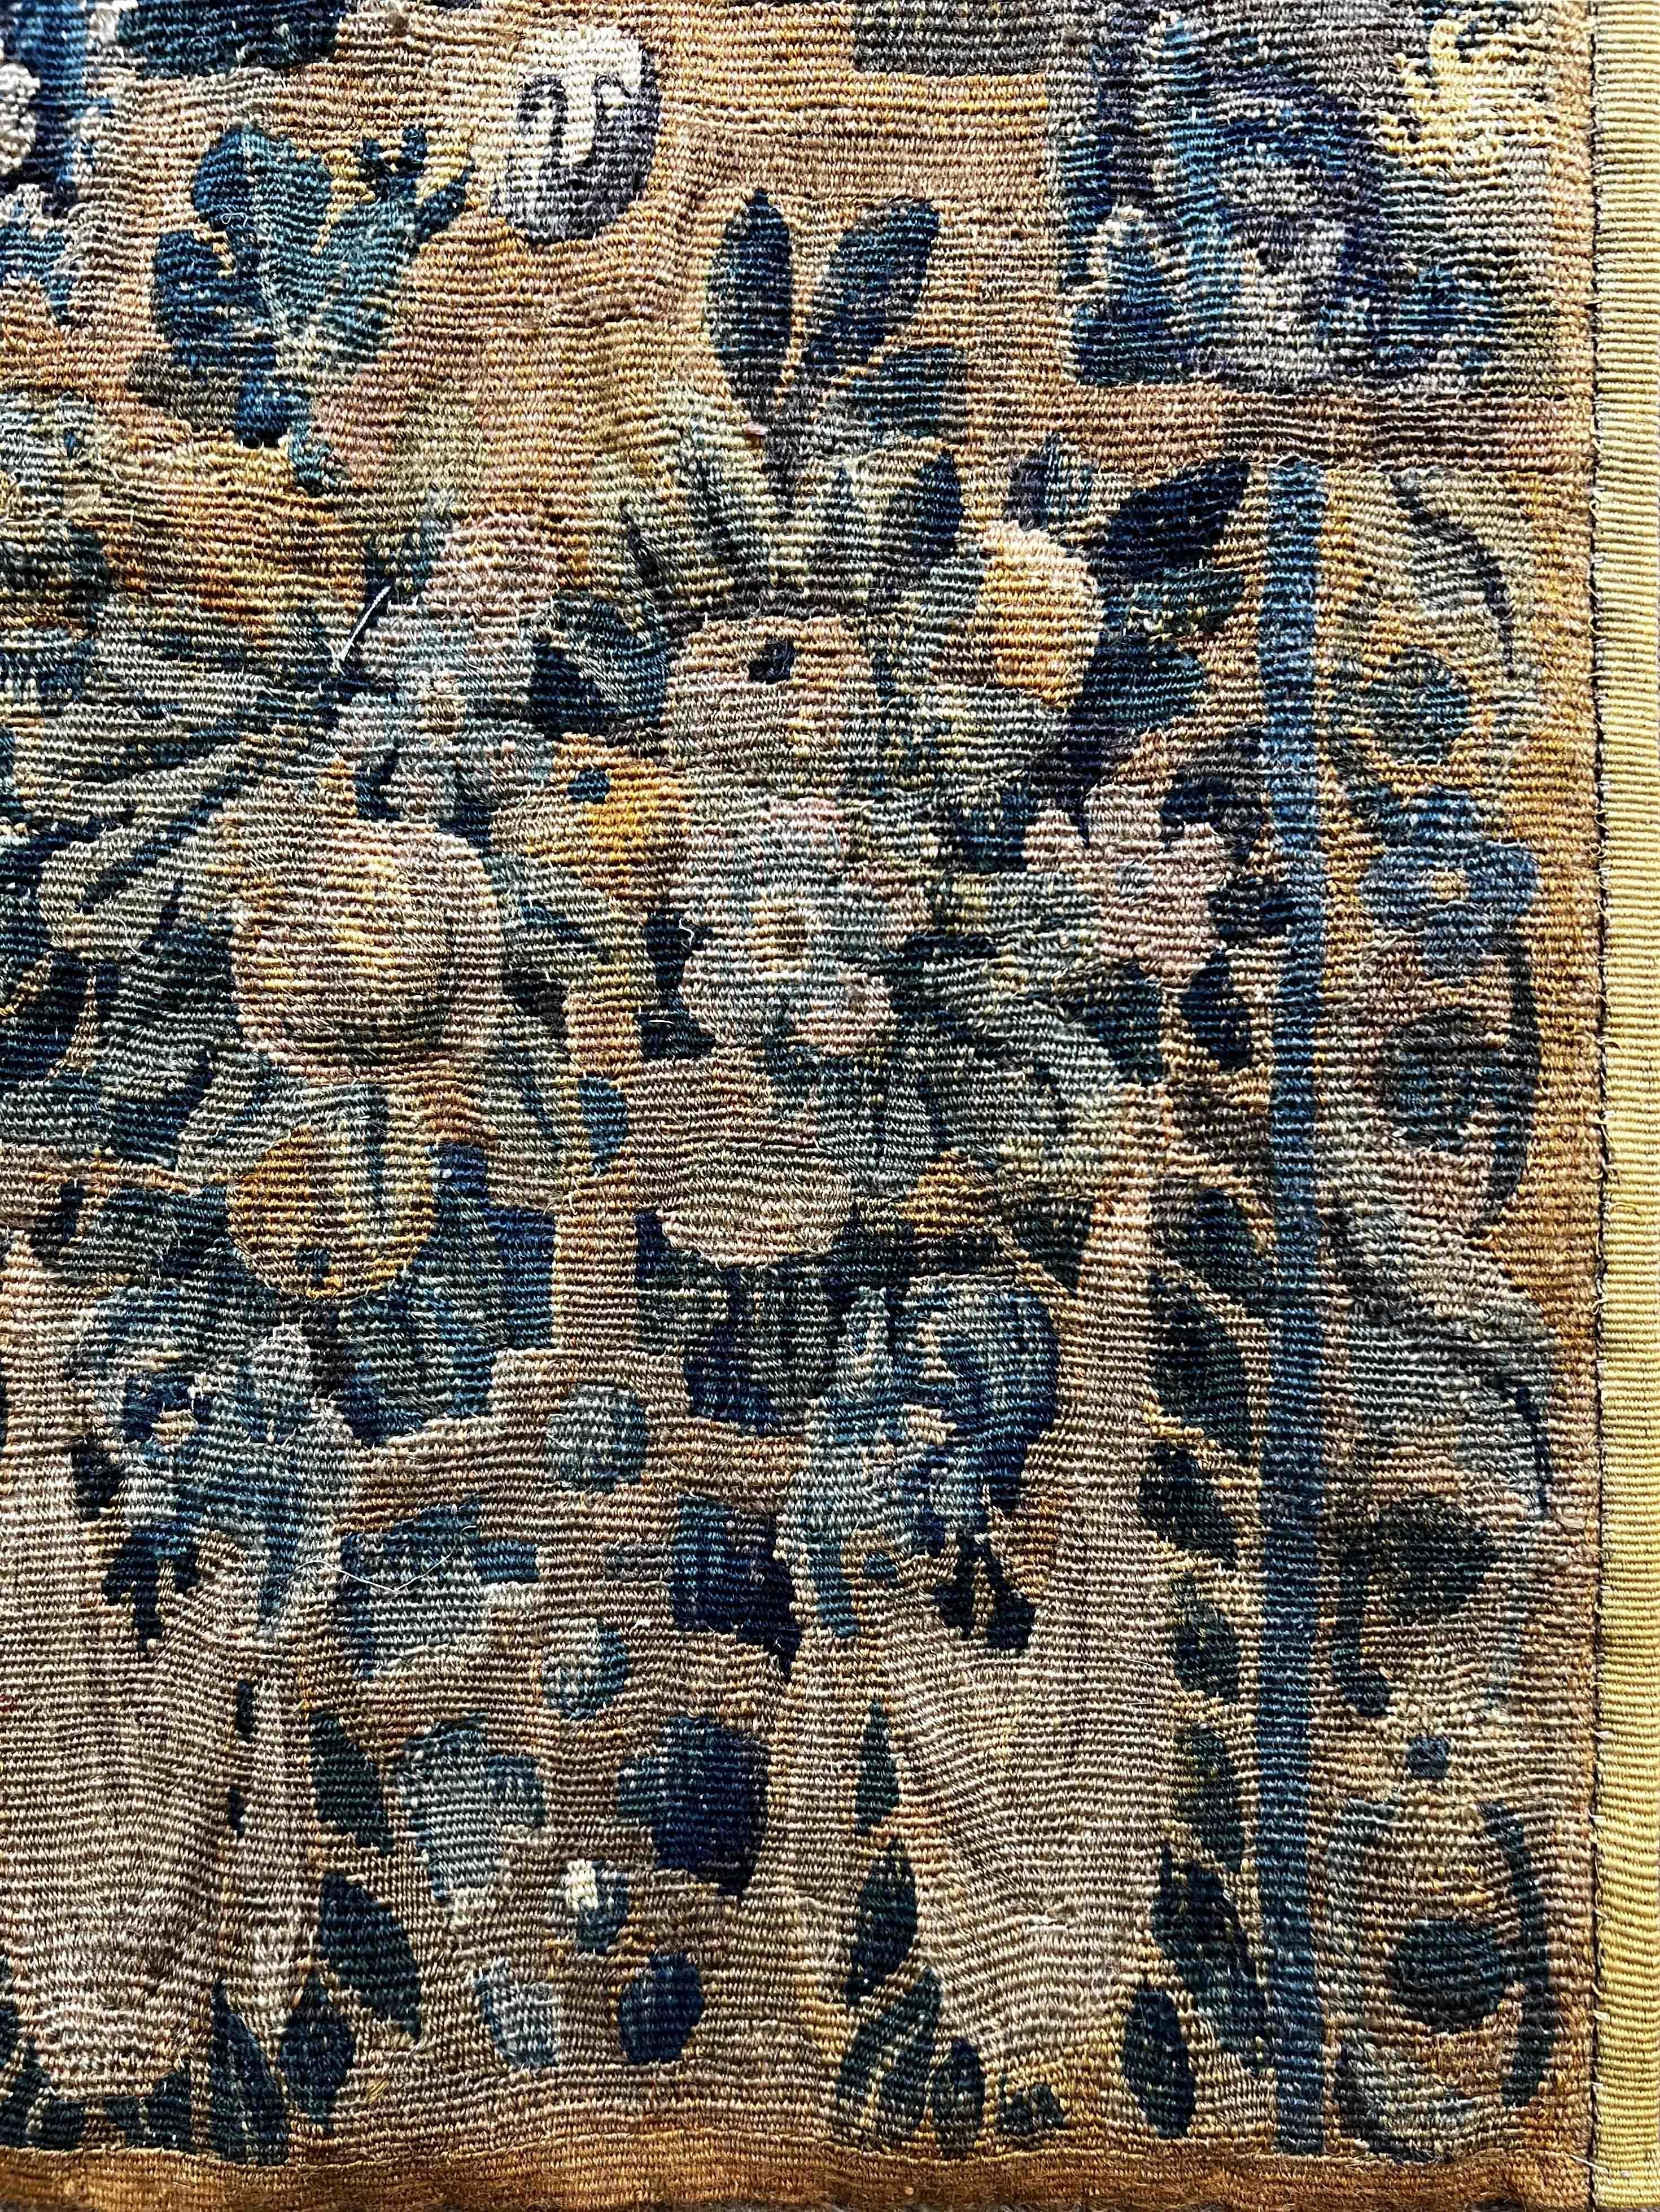 Aubusson 17th Century Tapestry from Flanders, N° 1184